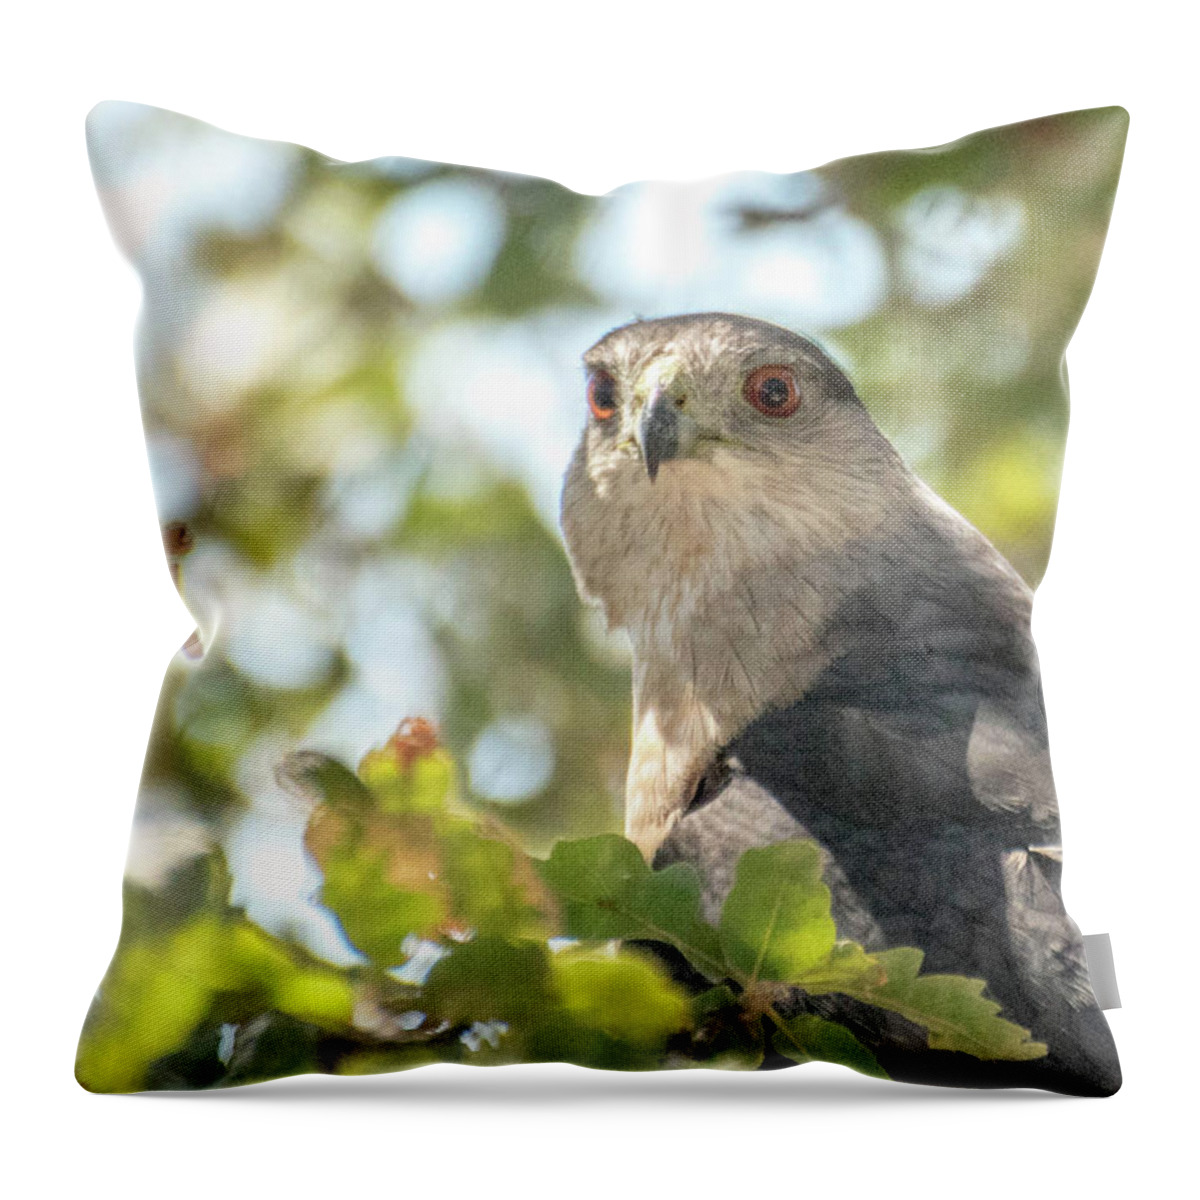  Throw Pillow featuring the photograph Hawk 3 by Wendy Carrington